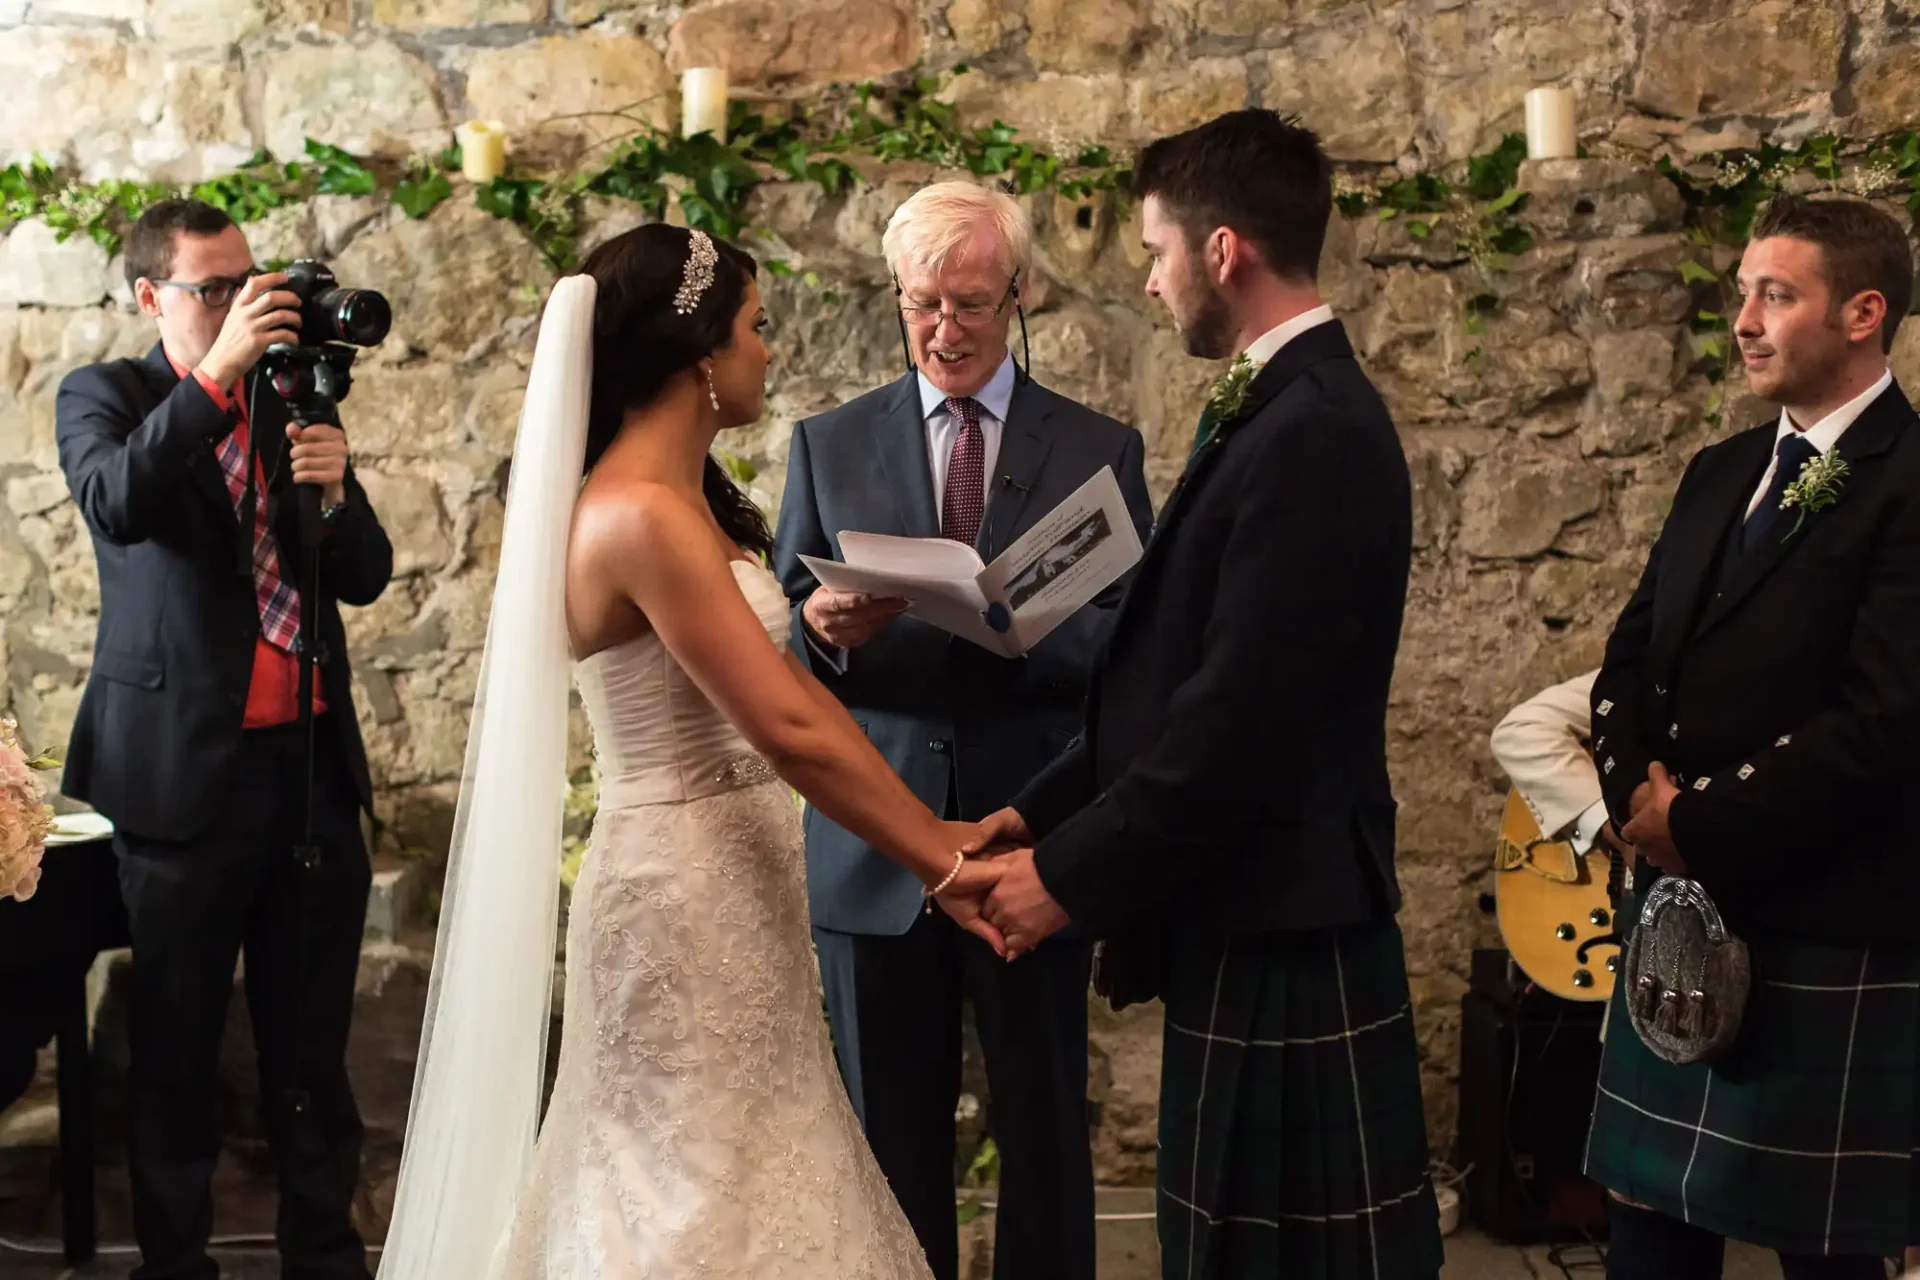 A bride and groom holding hands during their wedding ceremony, with an officiant reading vows and a photographer capturing the moment. guests in kilts are visible.